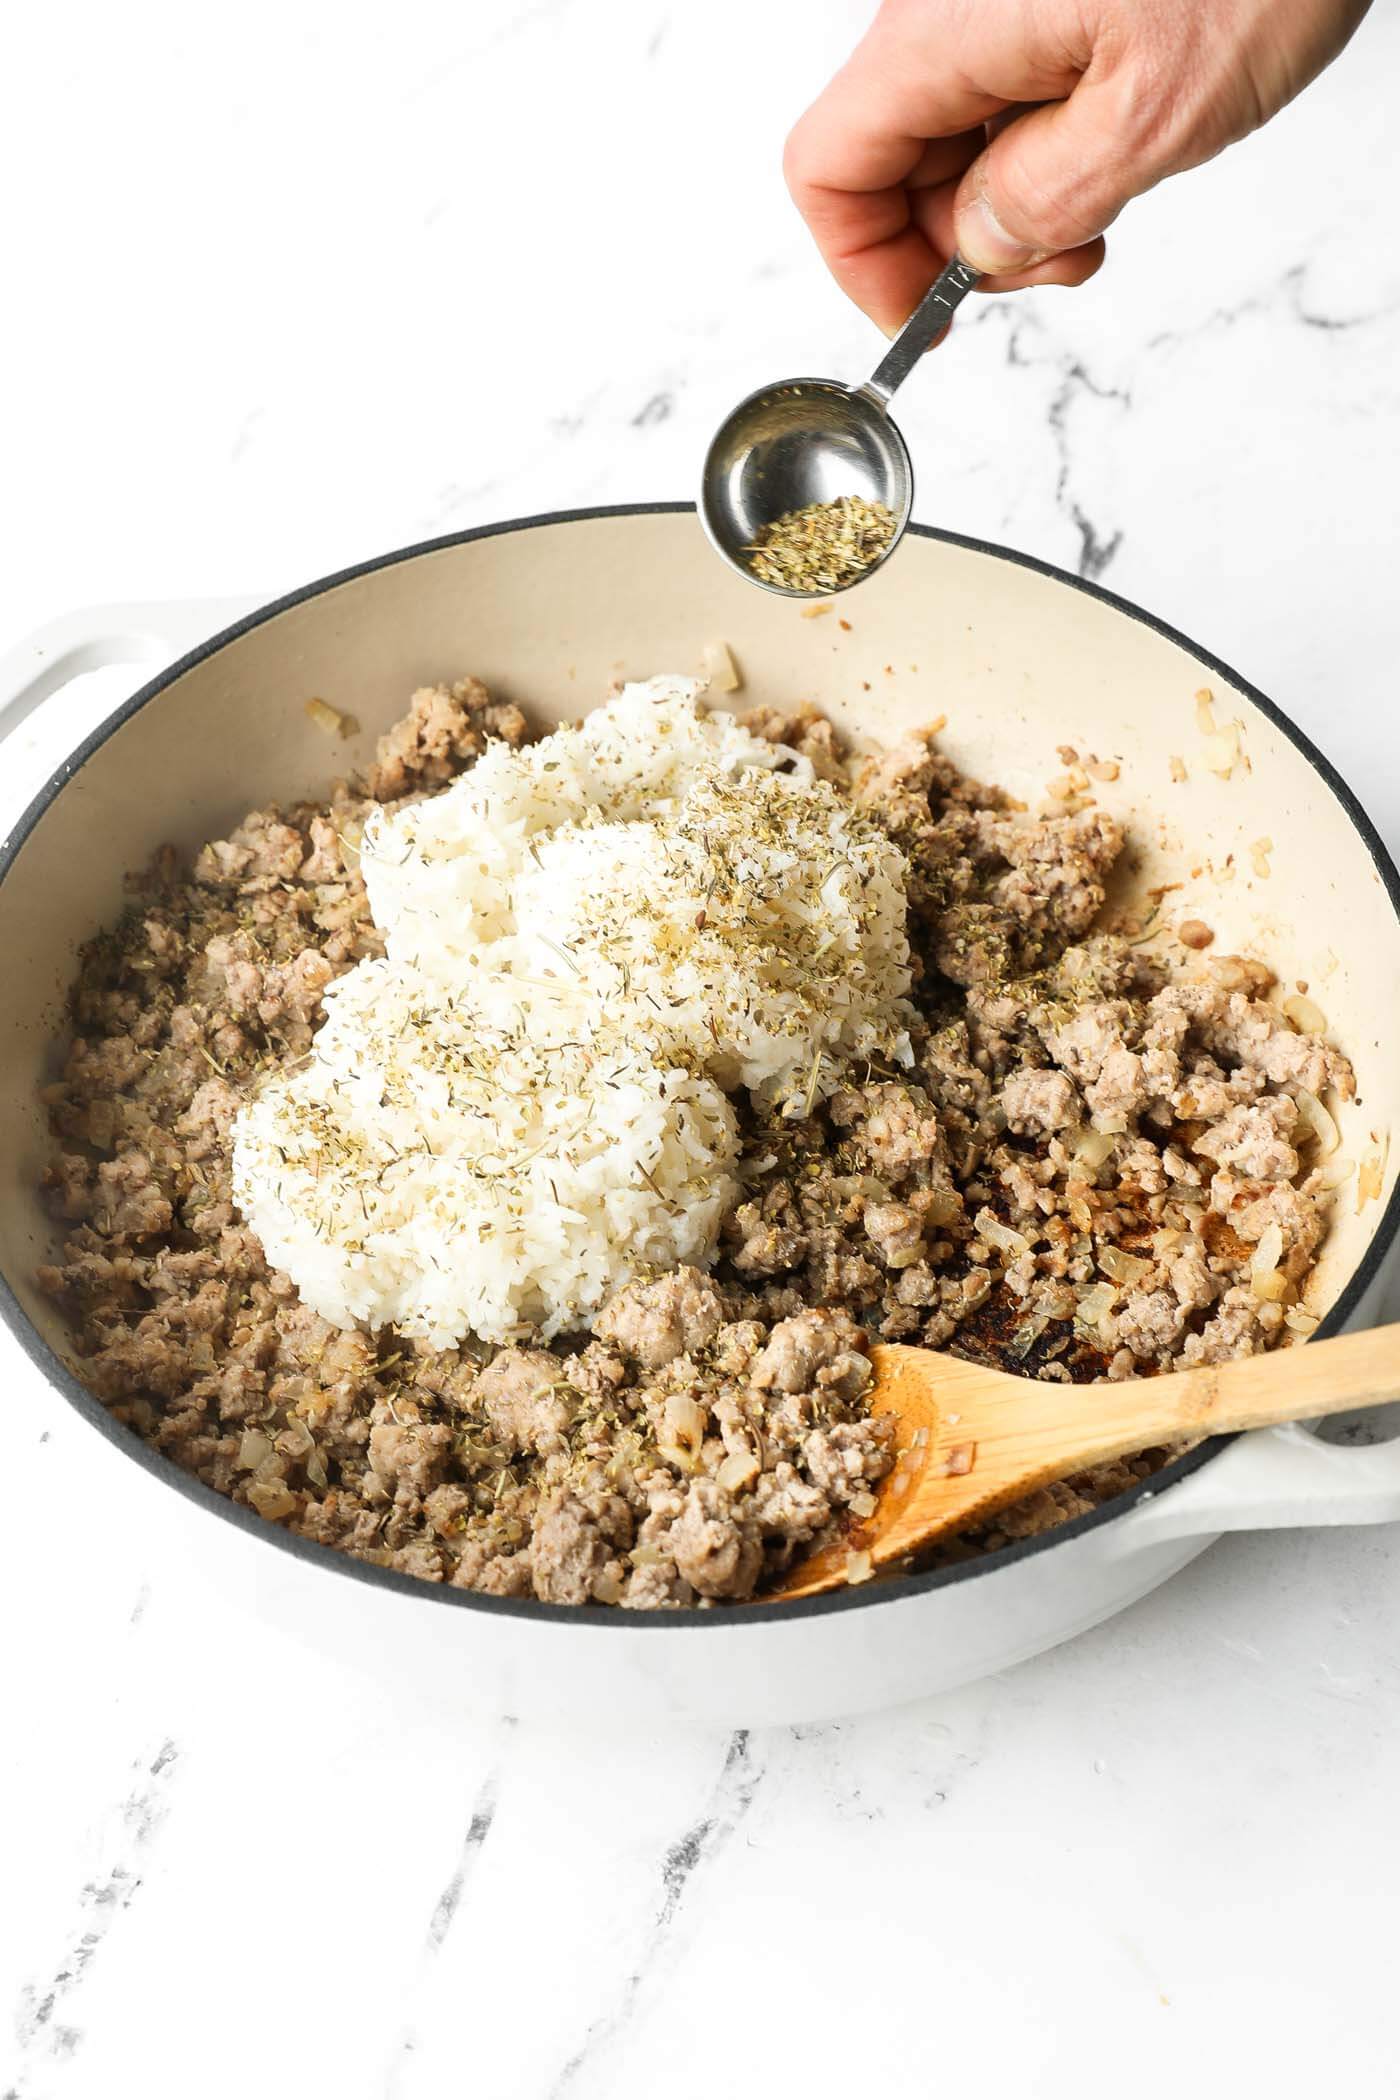 Angled image of a hand sprinkling Italian seasoning over the cooked ground pork and white rice in a skillet.